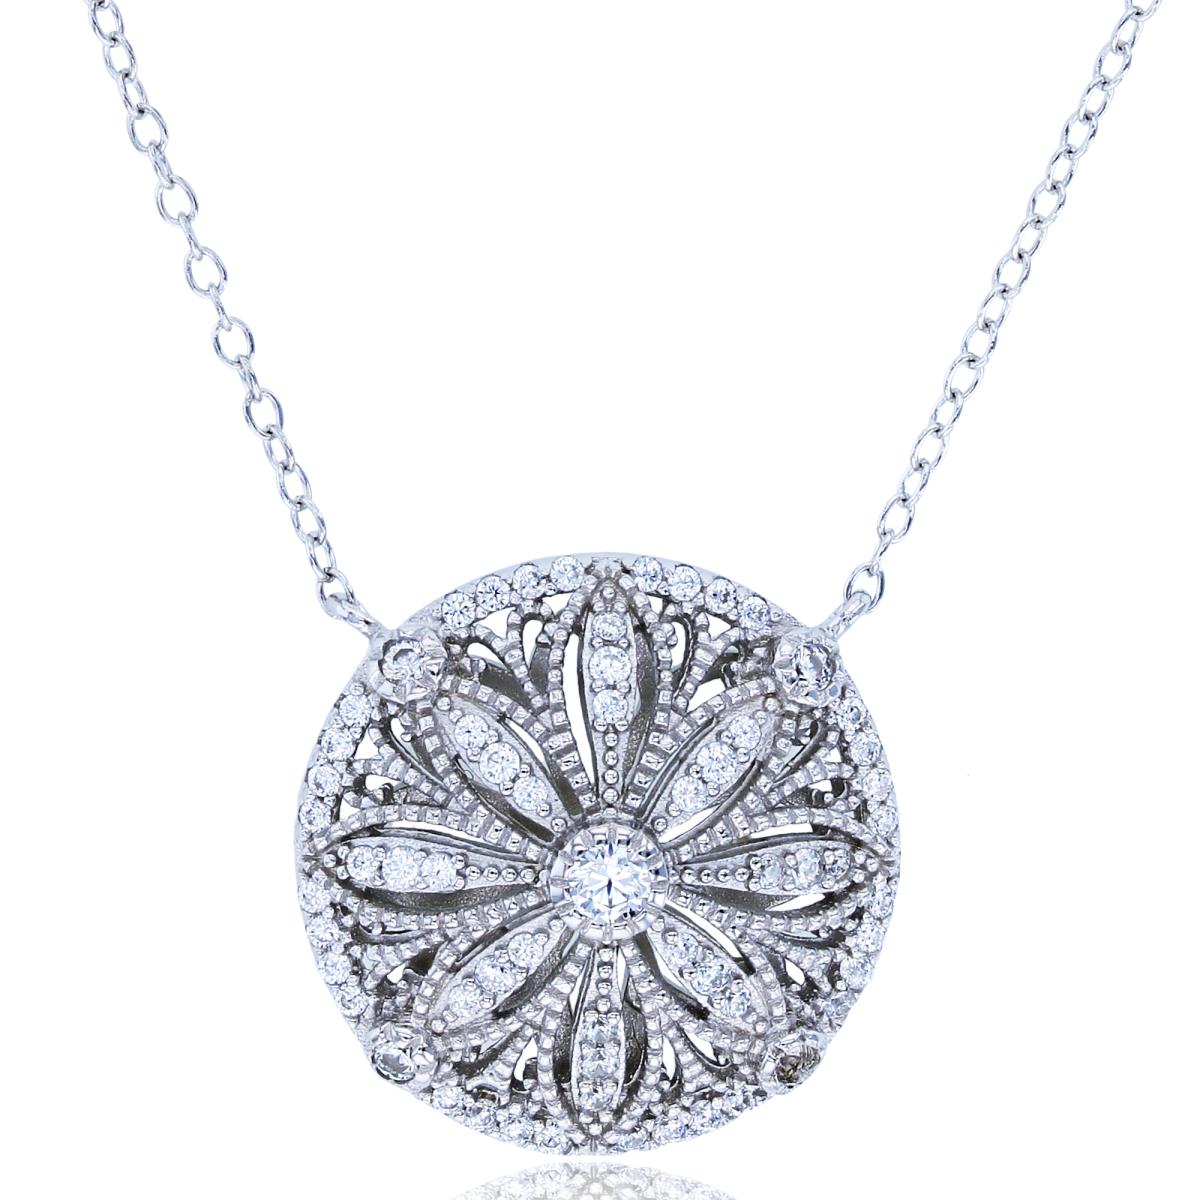 Sterling Silver+1Micron Yellow Gold Rnd CZ Milgrain Dome Flower in Circle 18"Necklace